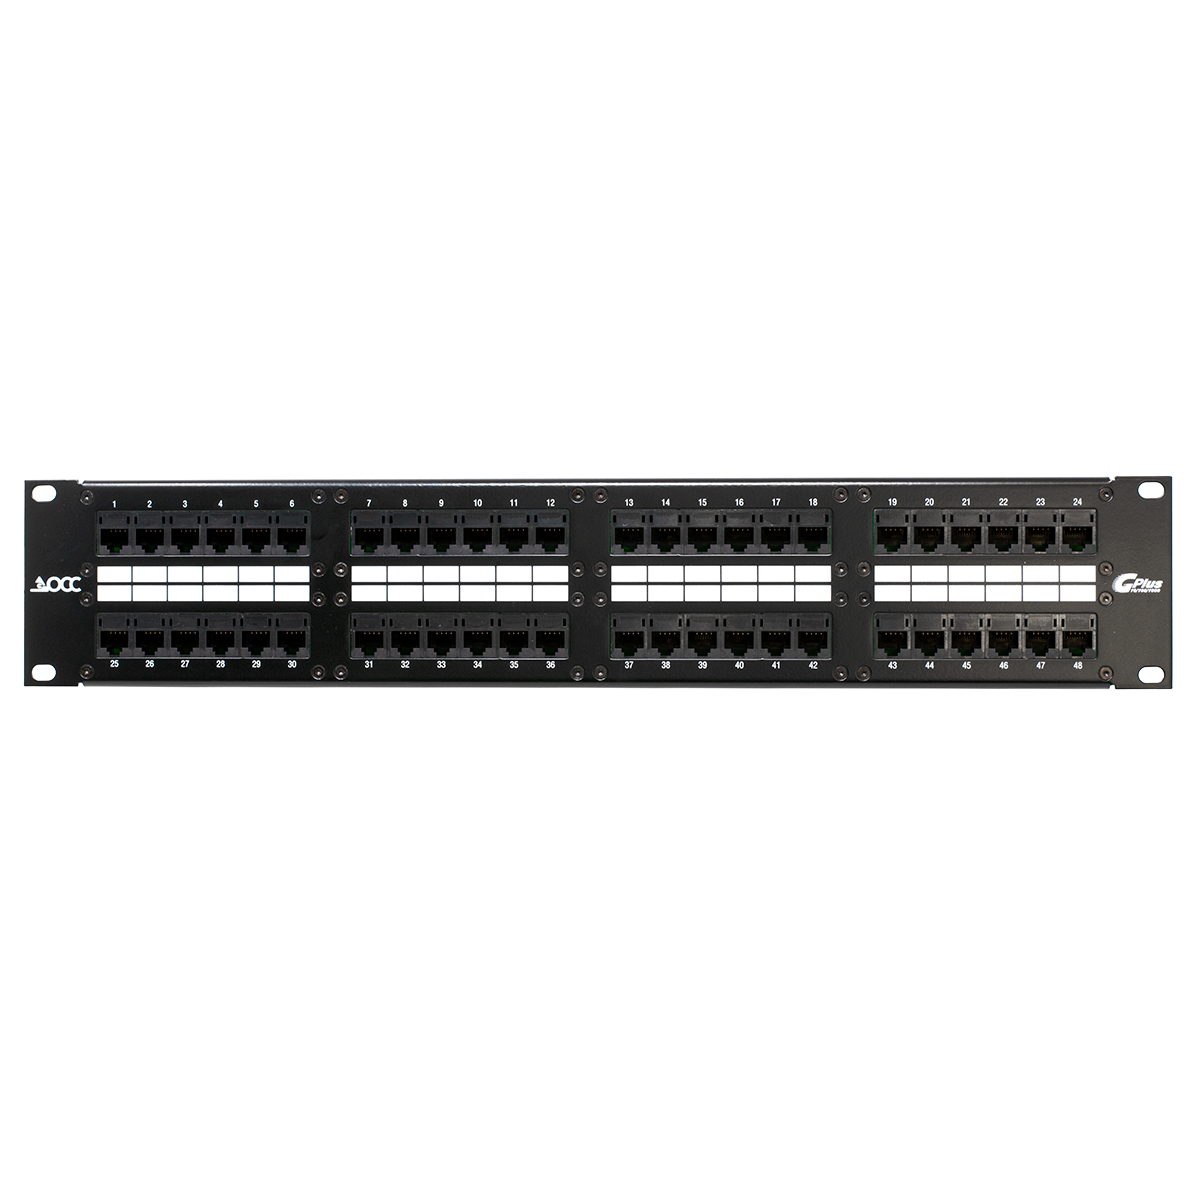  48 Port CAT5E Patch Panel with 8 Female Amp (Front View)